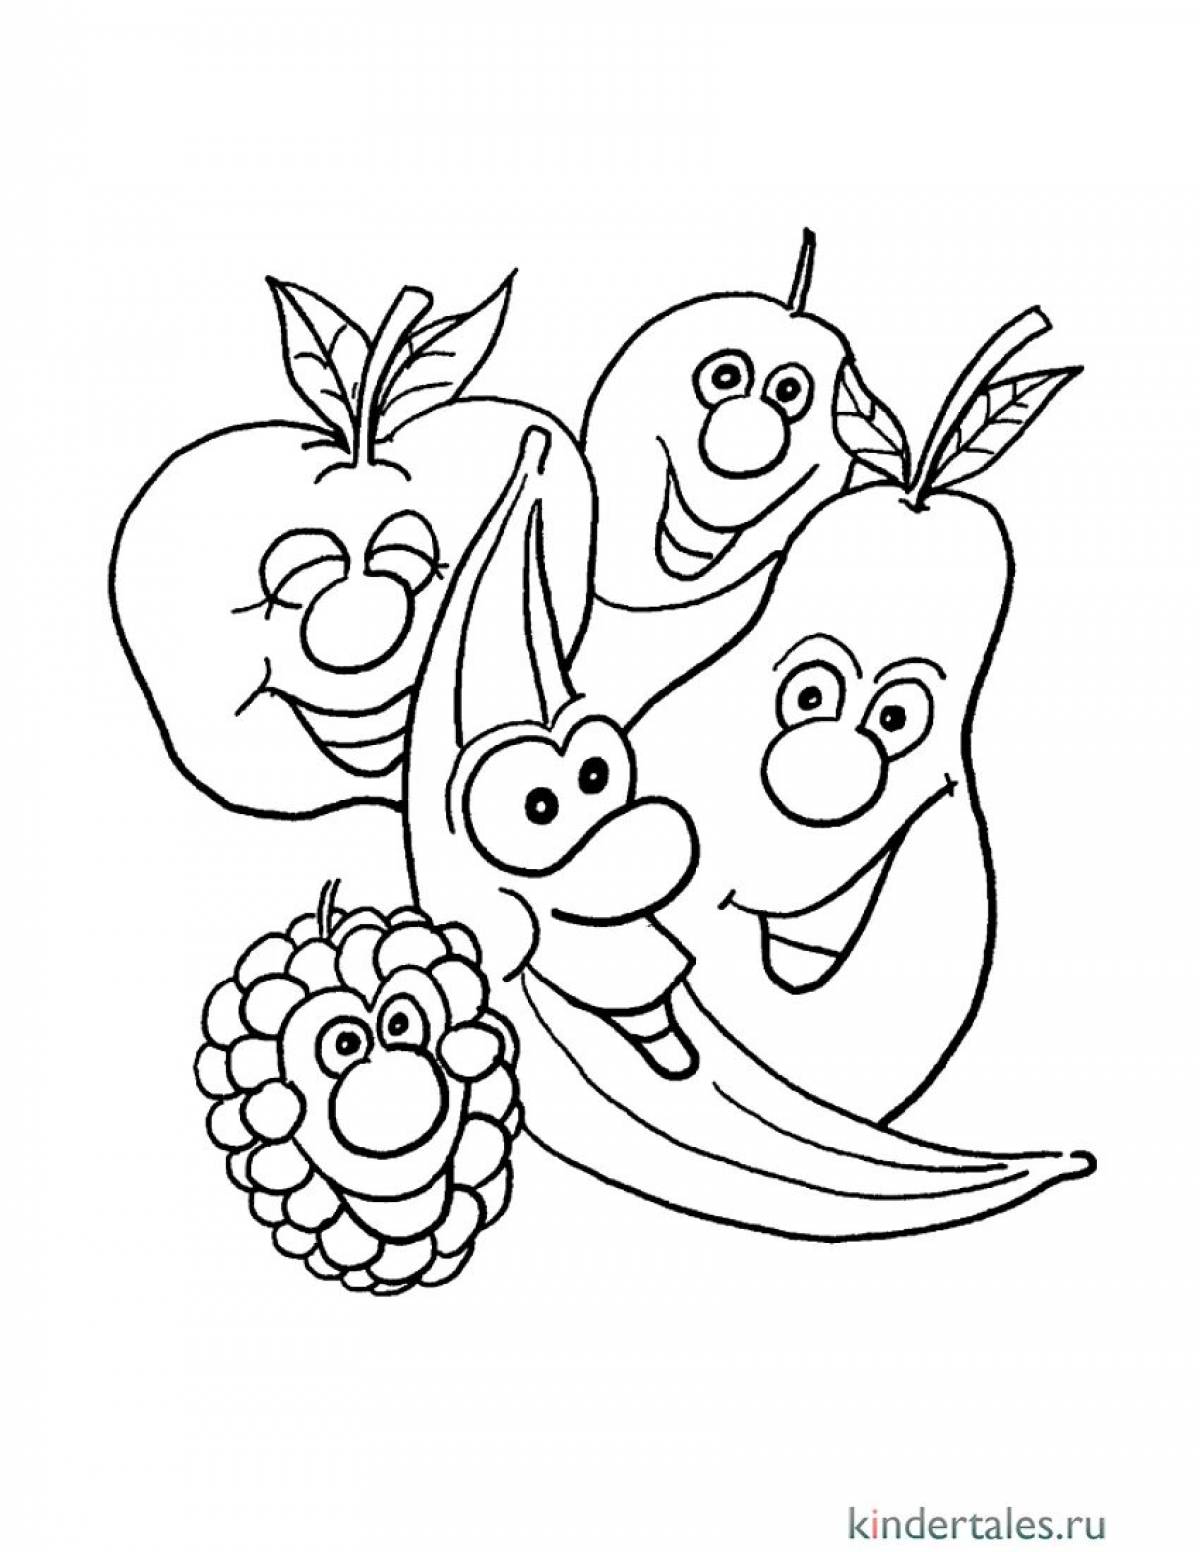 Tempting fruit and vegetable coloring book for girls